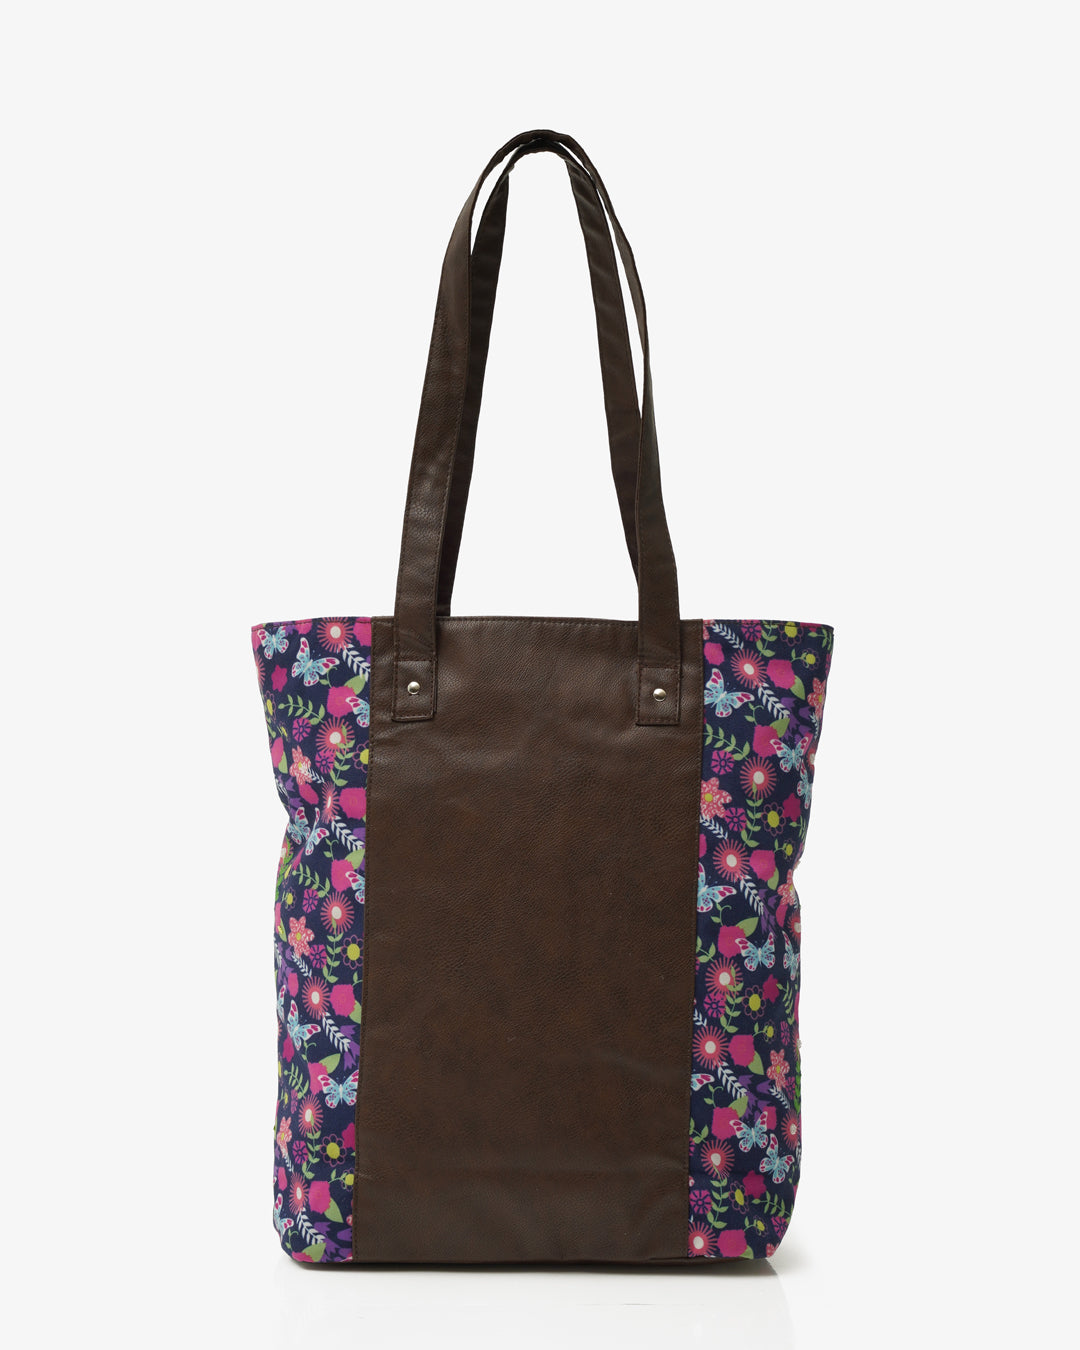 Butterfly Bloom Shoulder Tote Bag with Vegan Leather